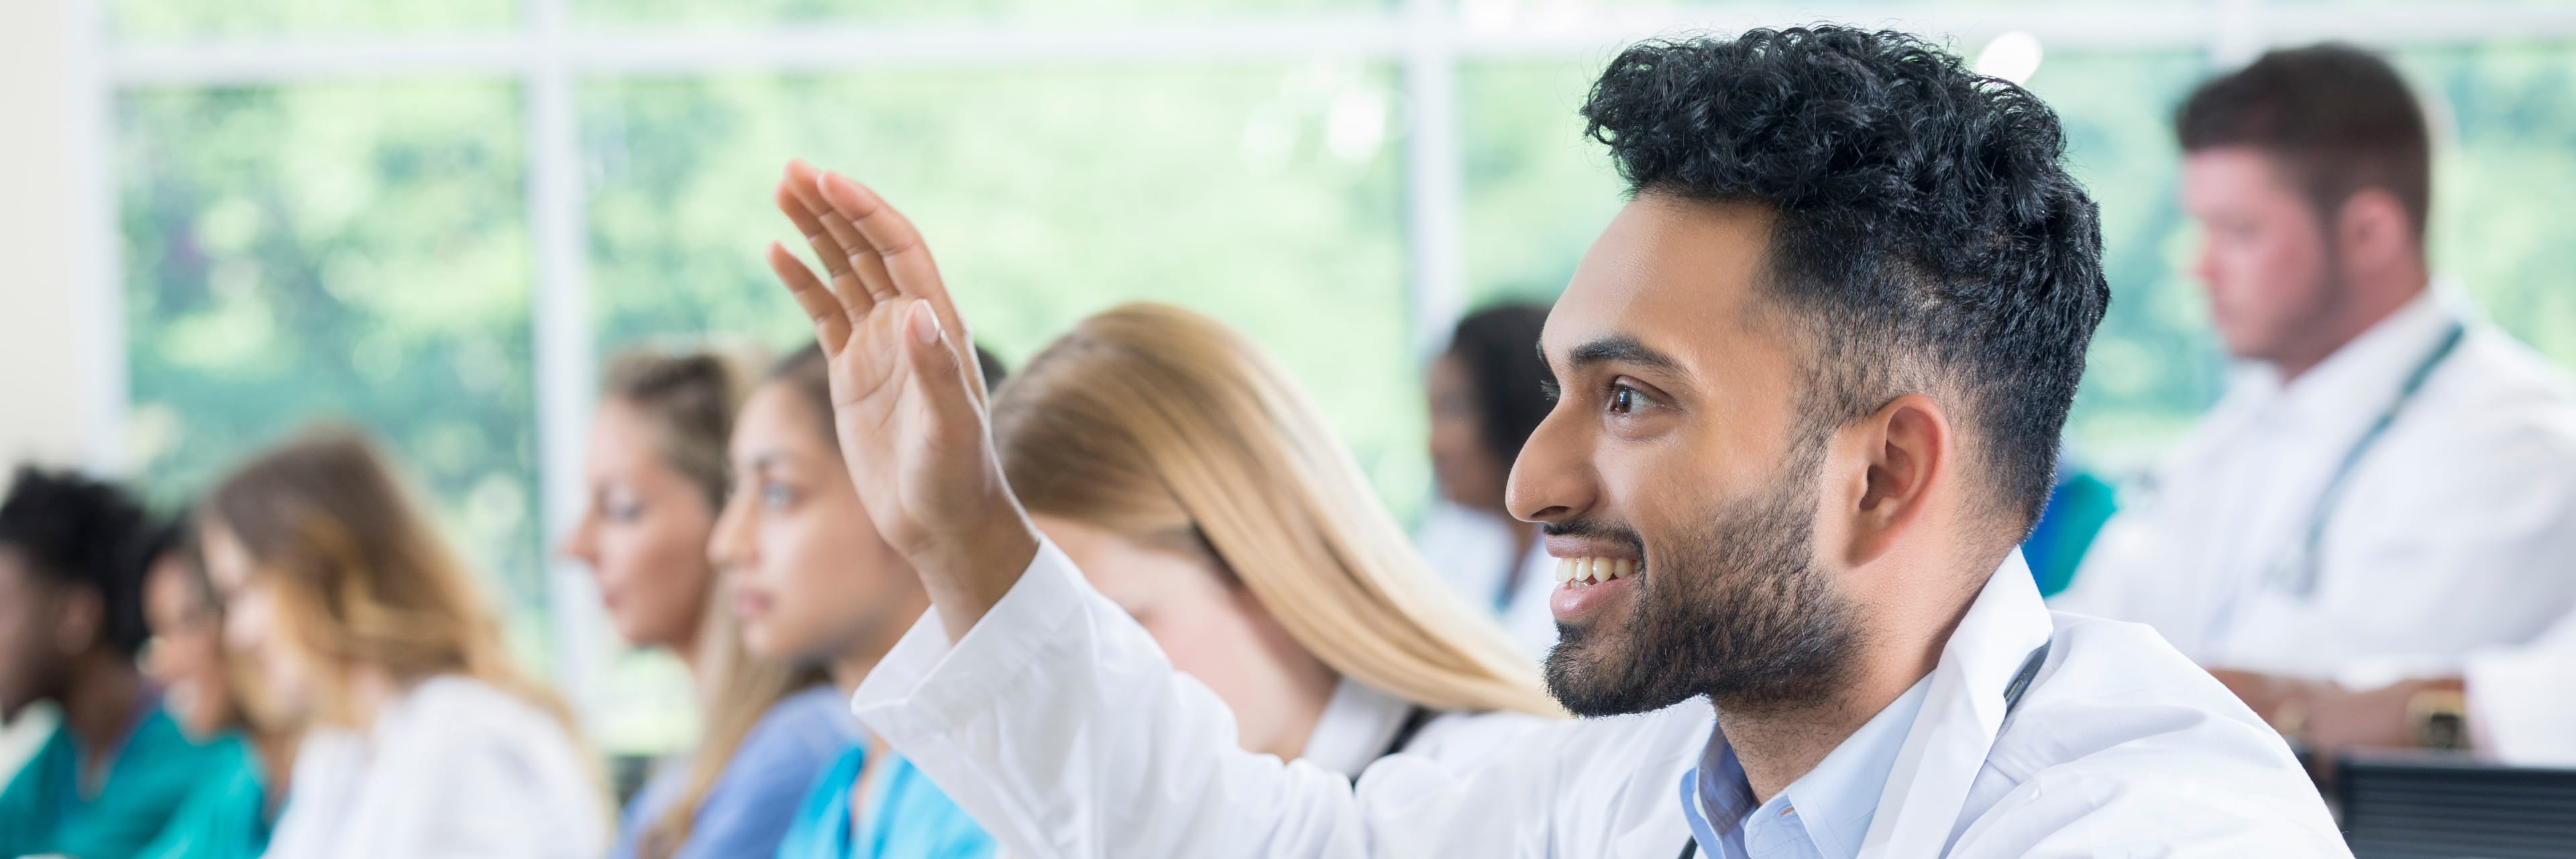 young male doctor raising his hand in a classroom setting with colleagues in the background